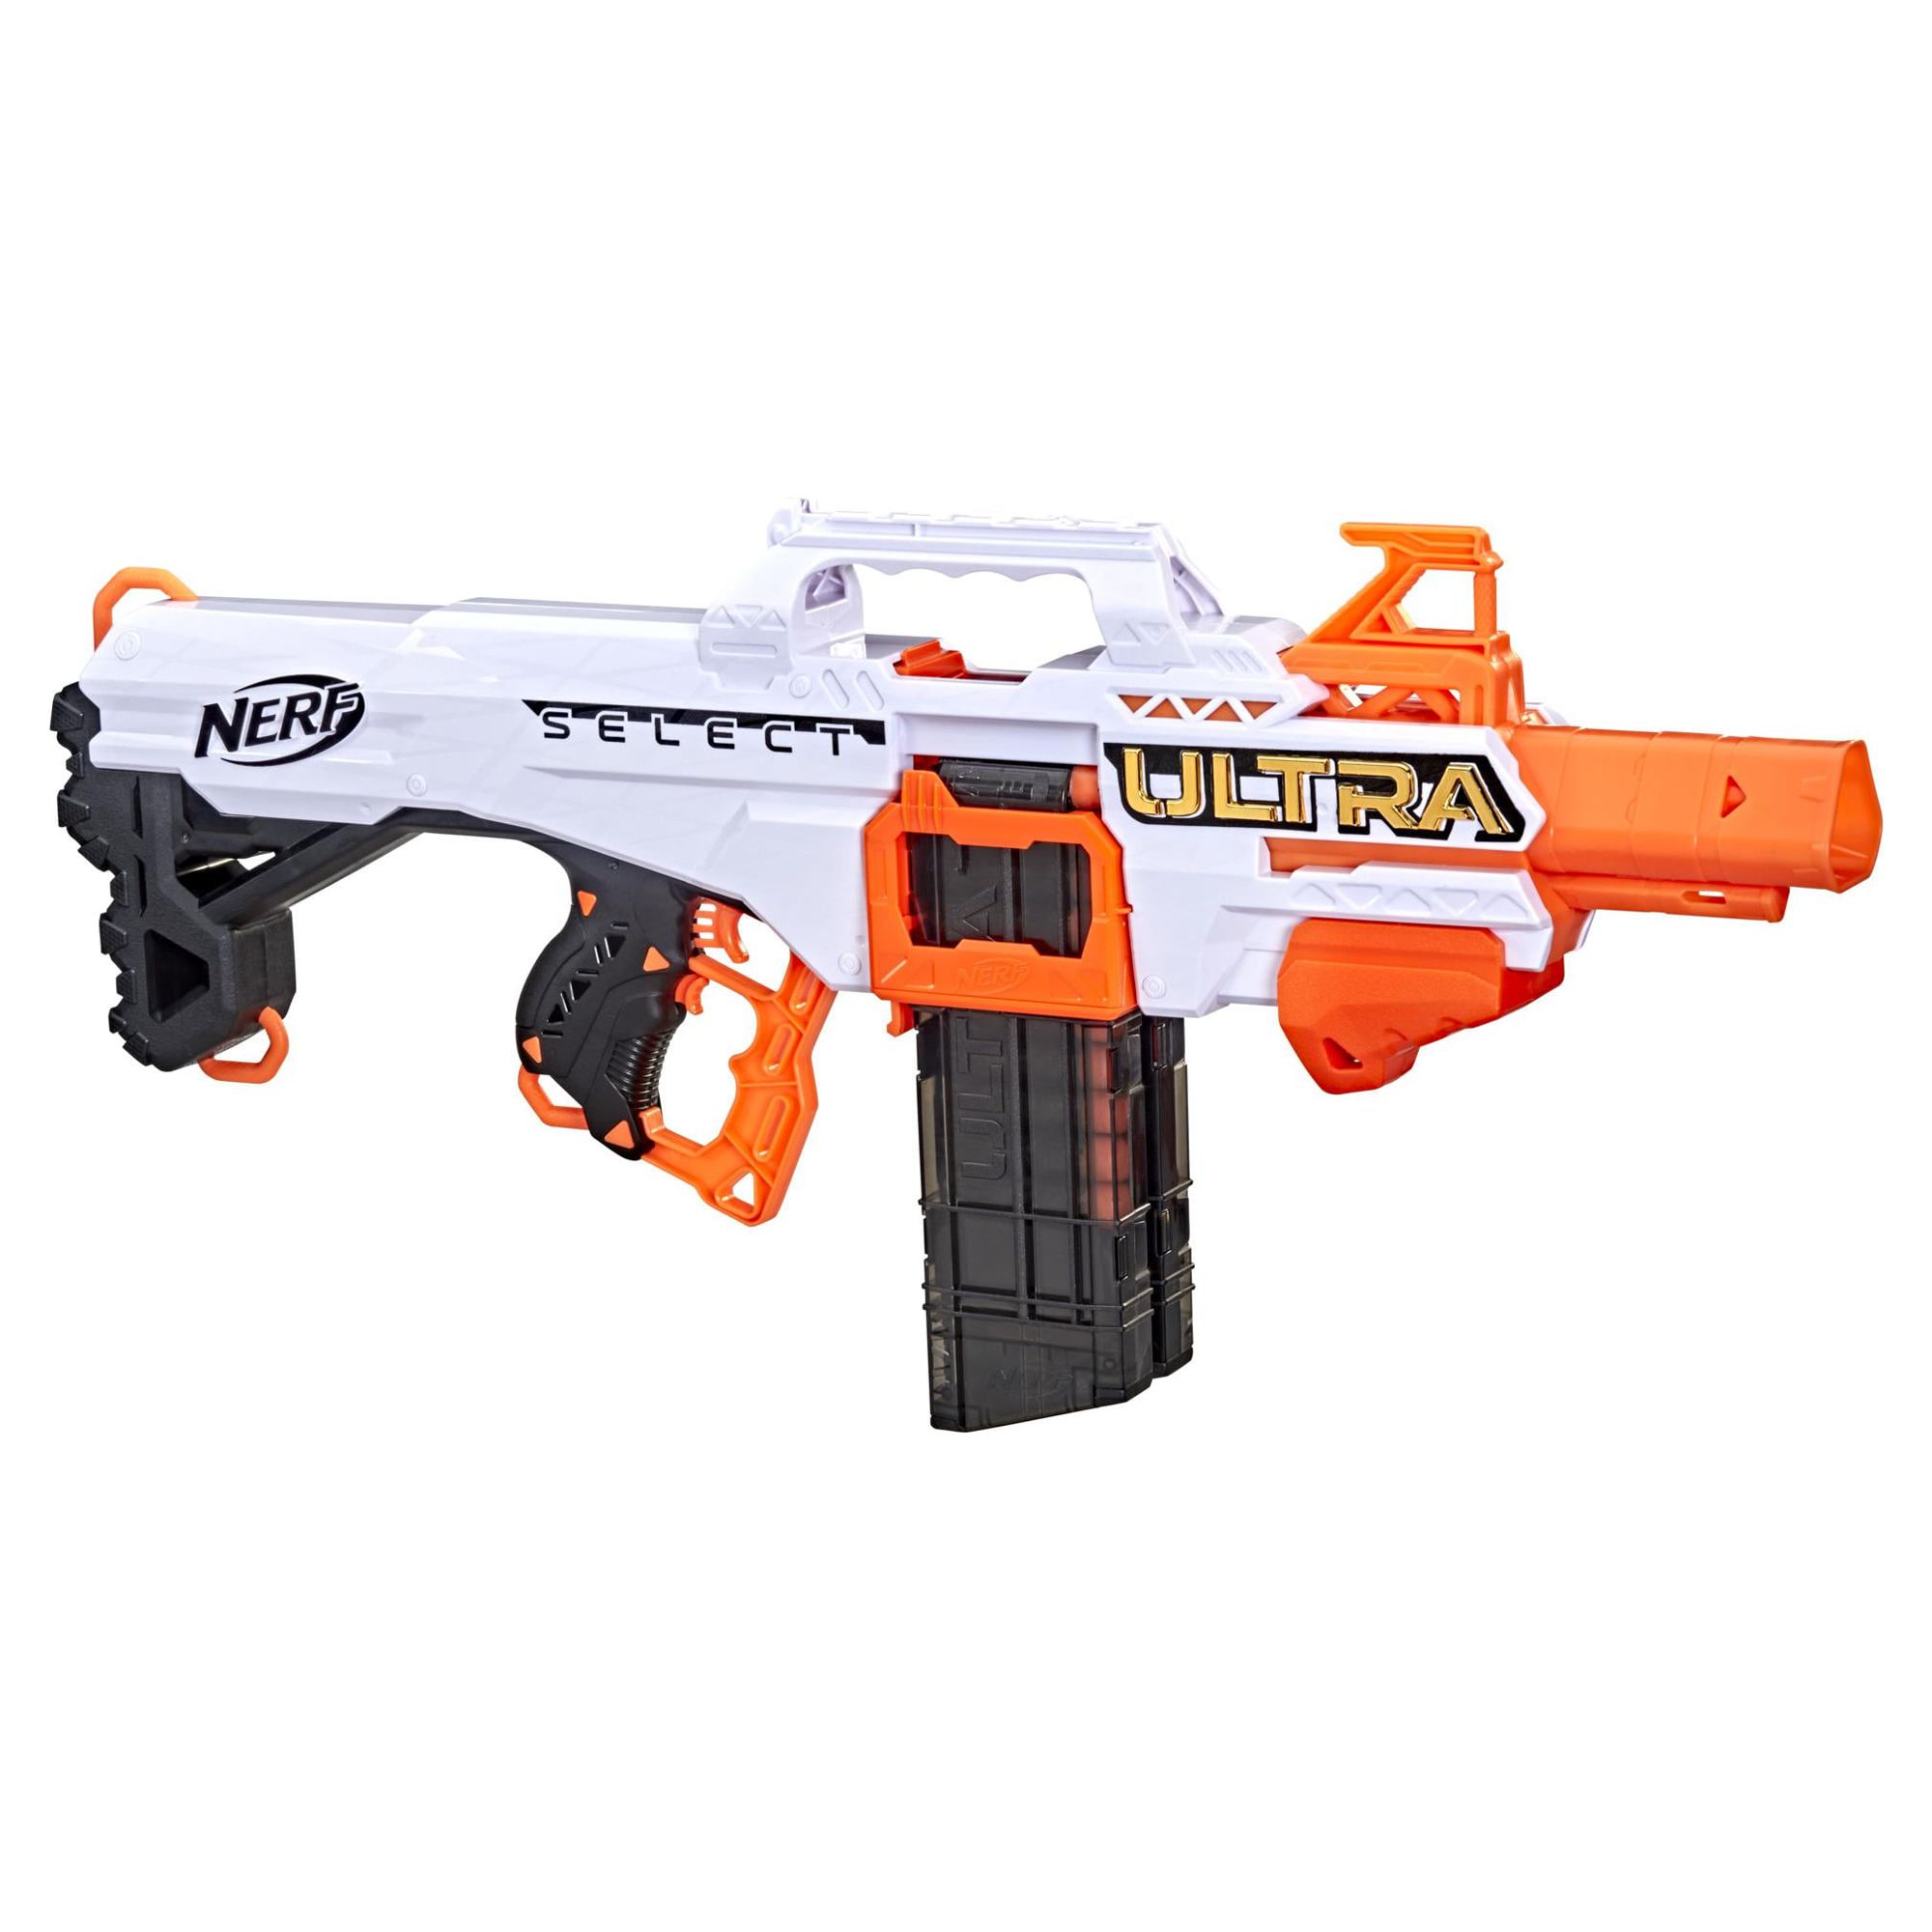 Nerf Ultra Select Fully Motorized Blaster, Fire 2 Ways, Includes Clips and Darts, Compatible Only with Nerf Ultra Darts - image 4 of 5